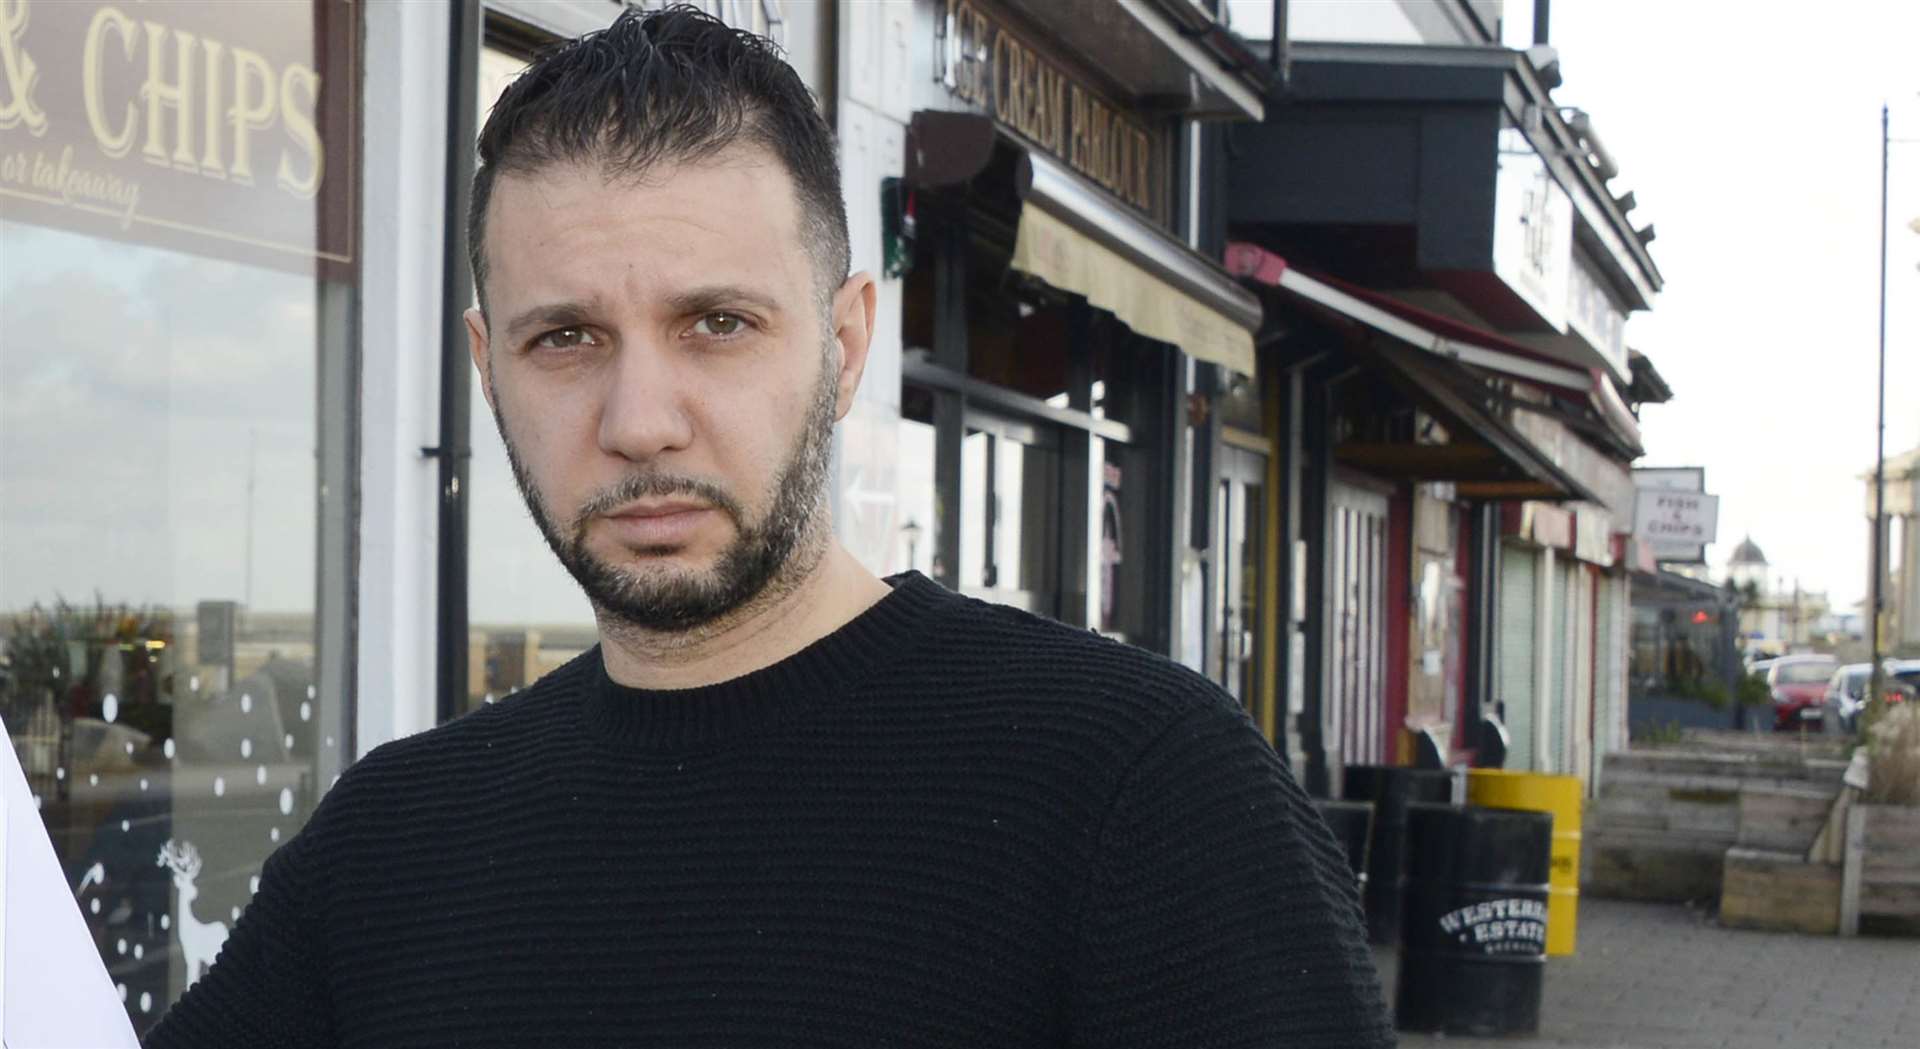 Hassan Hassan, of Makcaris in Herne Bay defended his actions in running a takeaway service